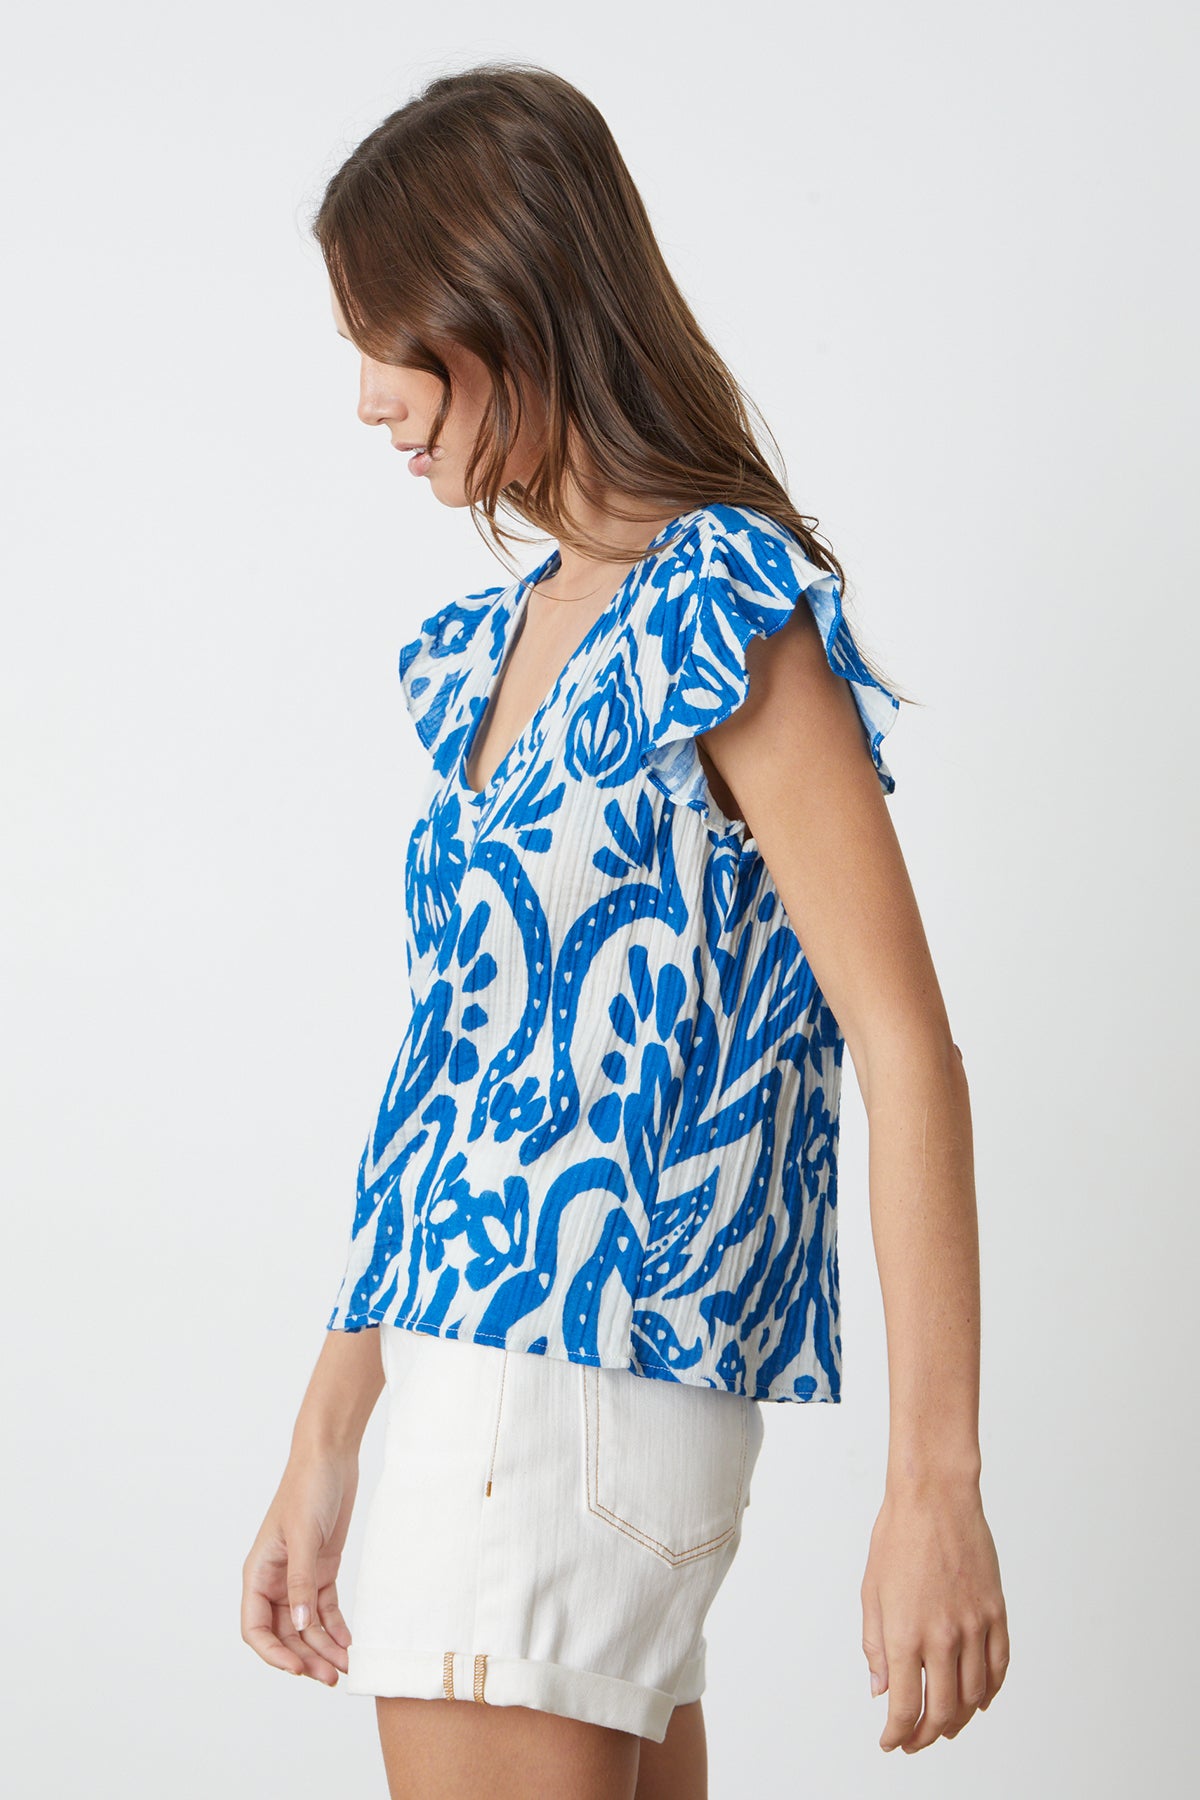 The model is wearing an ALEAH PRINTED COTTON GAUZE top by Velvet by Graham & Spencer.-26342683410625